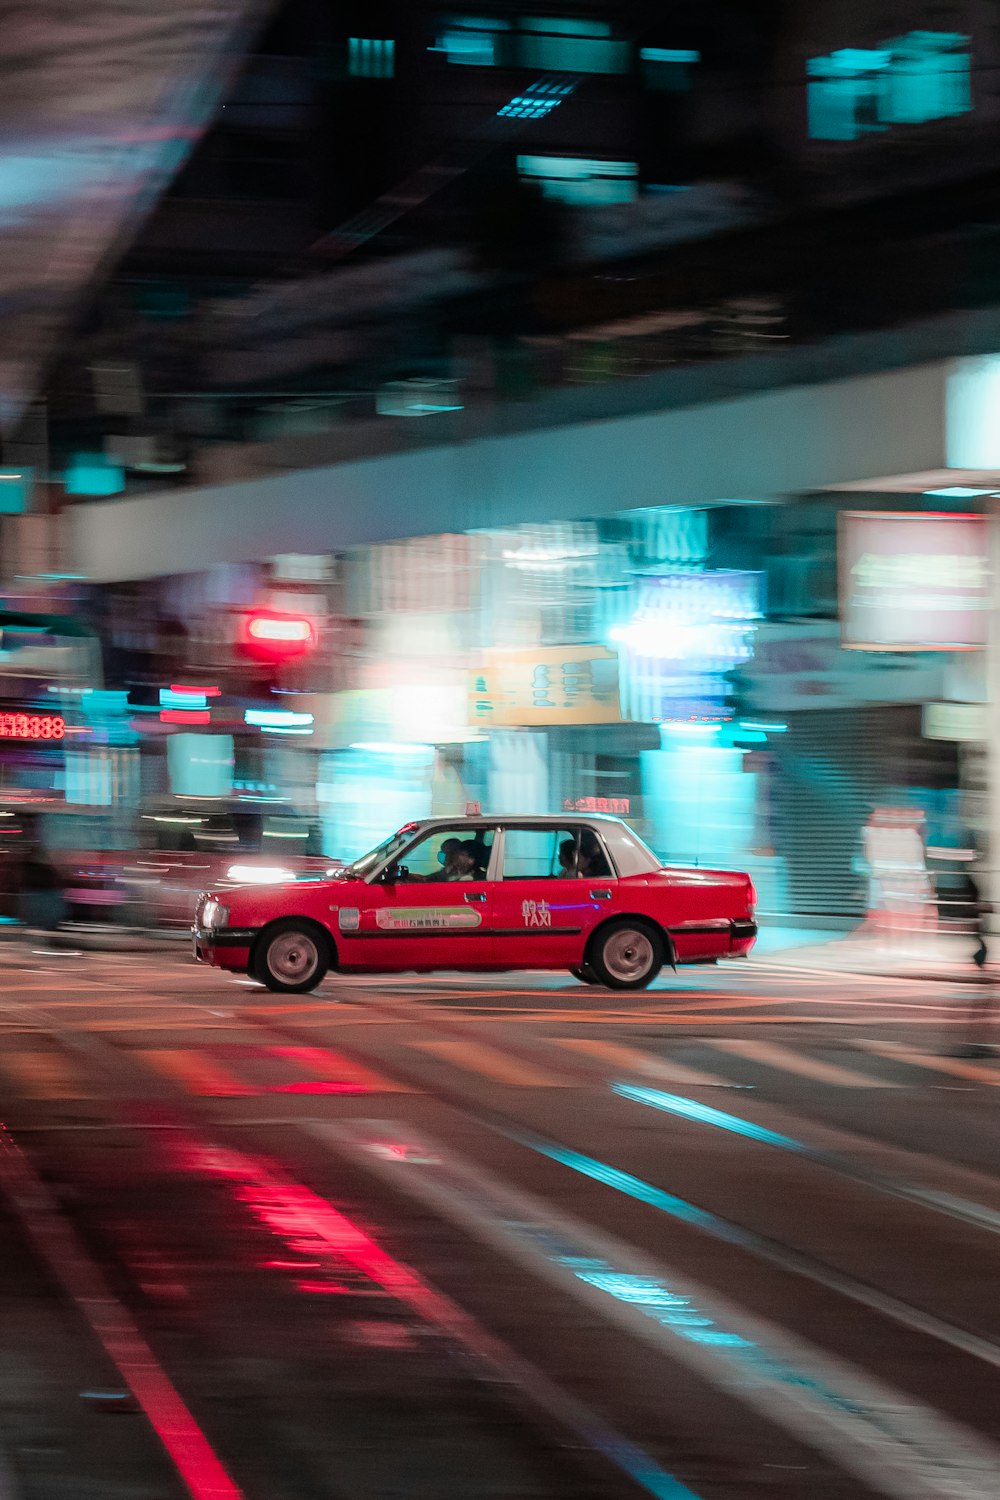 a red taxi cab driving down a street next to tall buildings